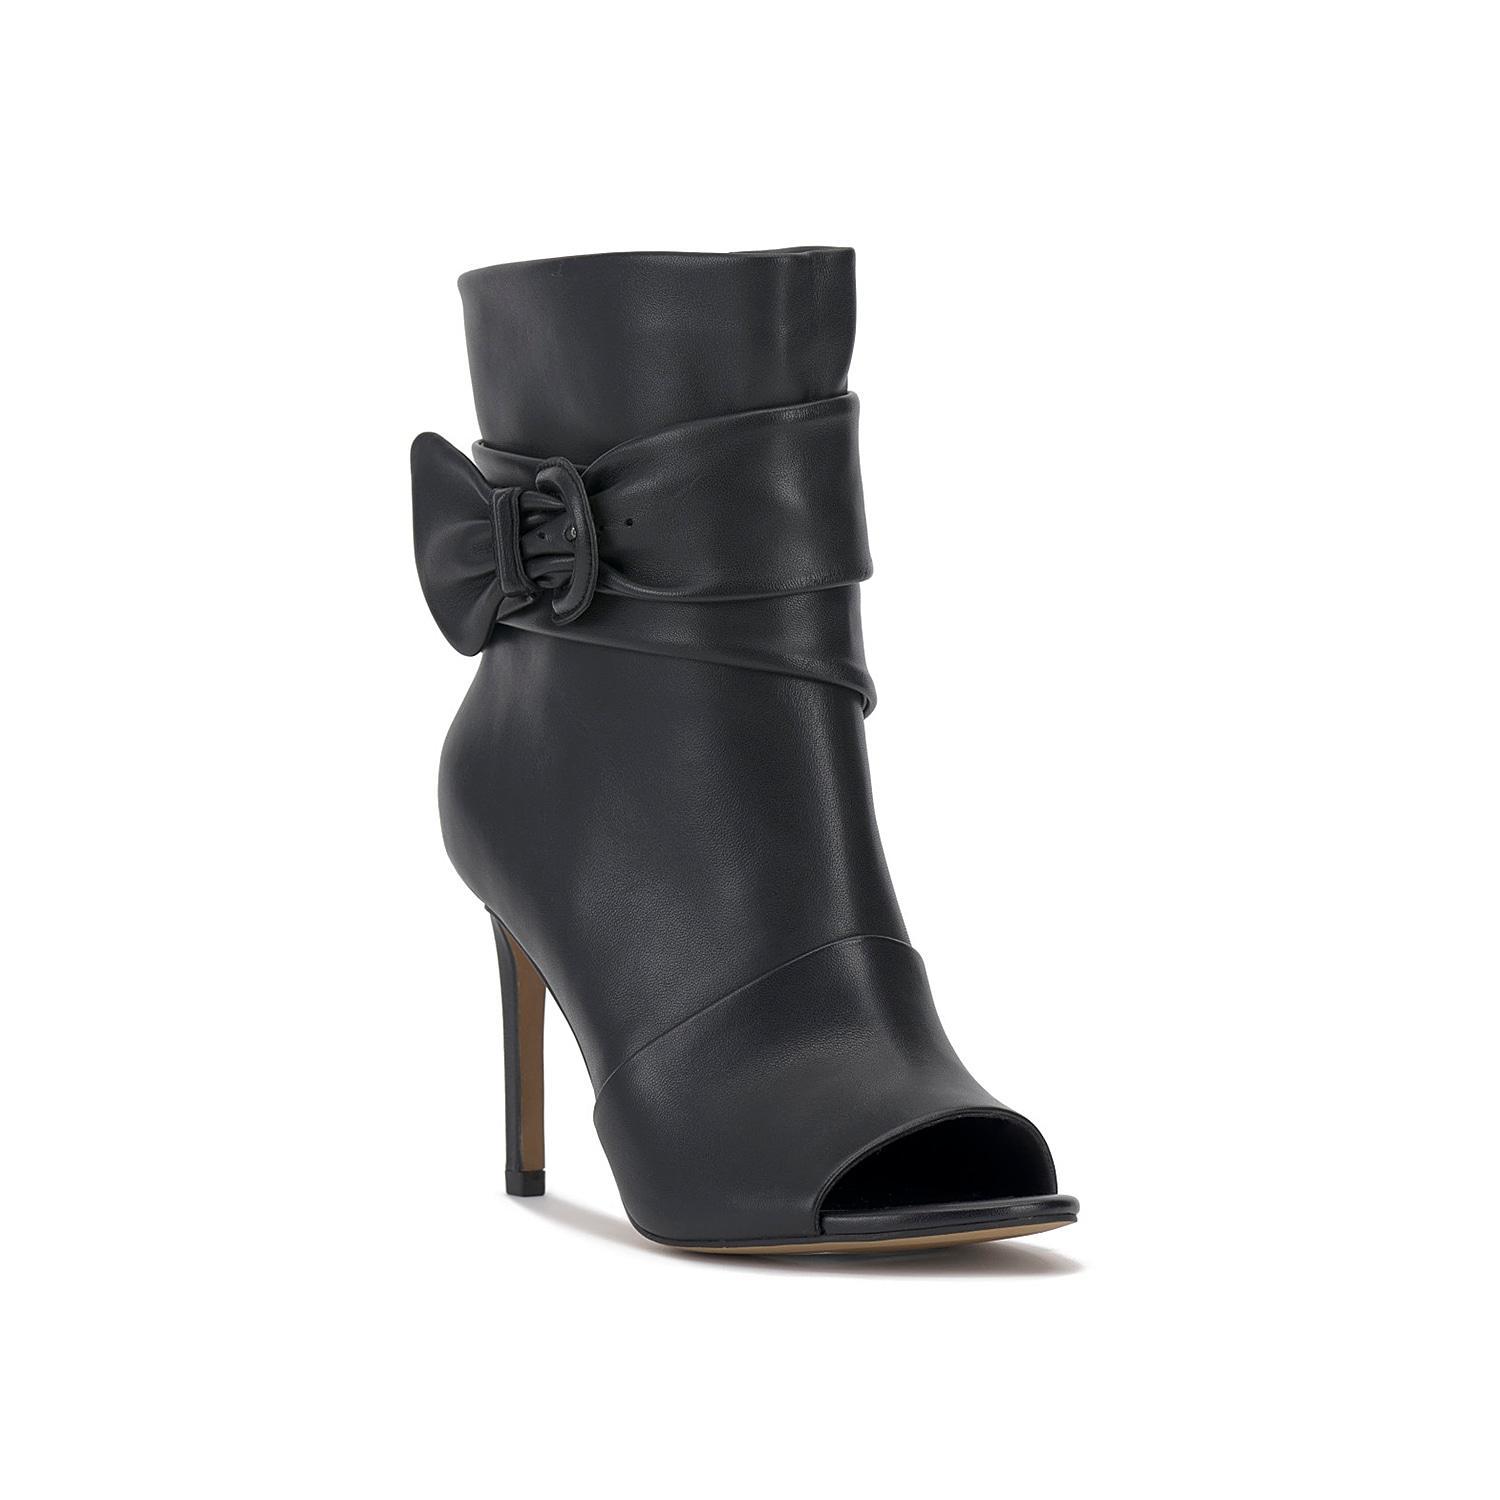 Vince Camuto Antaya Open Toe Bootie Product Image